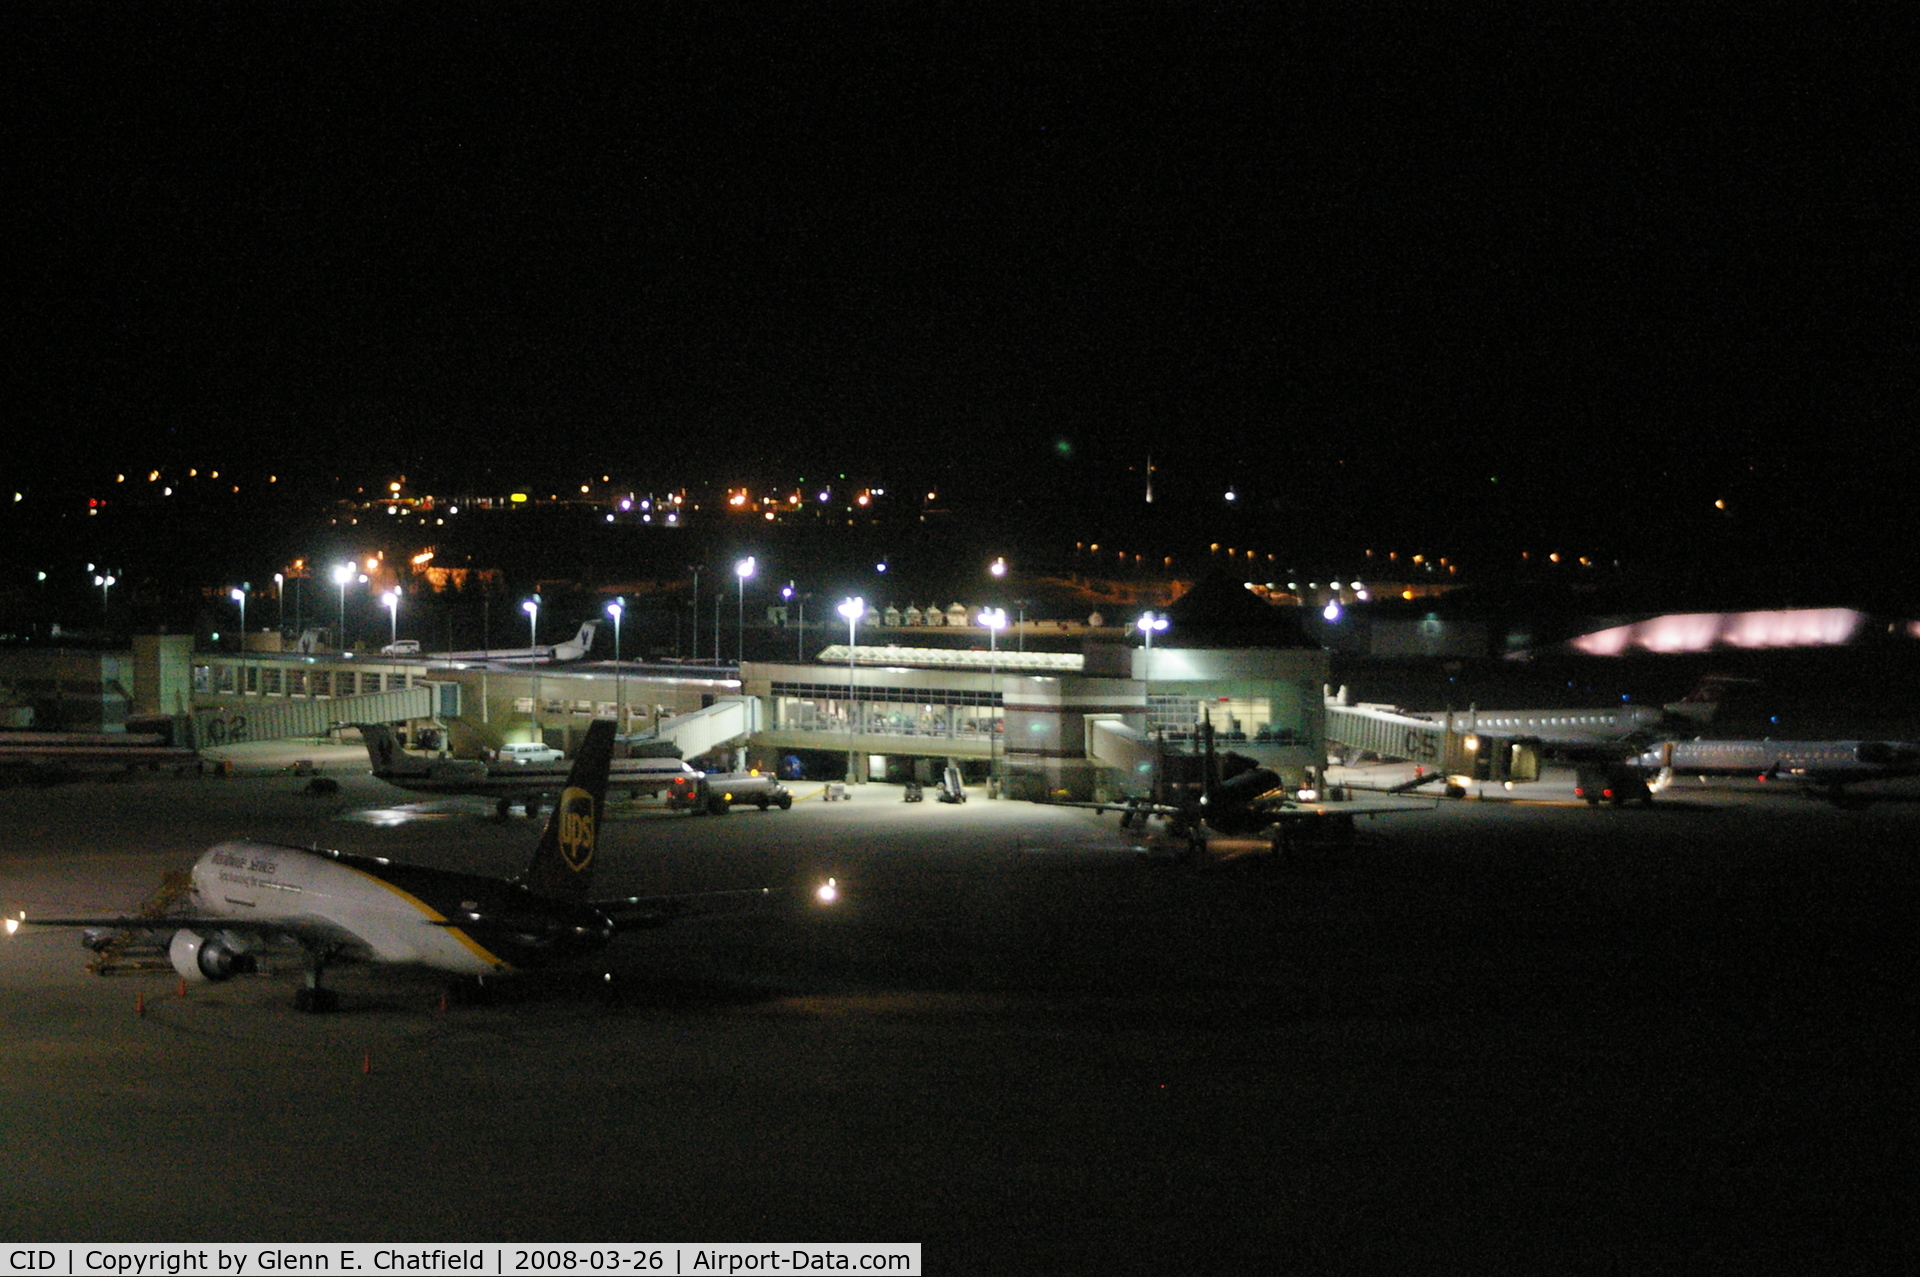 The Eastern Iowa Airport (CID) - The terminal at about 5:40 AM